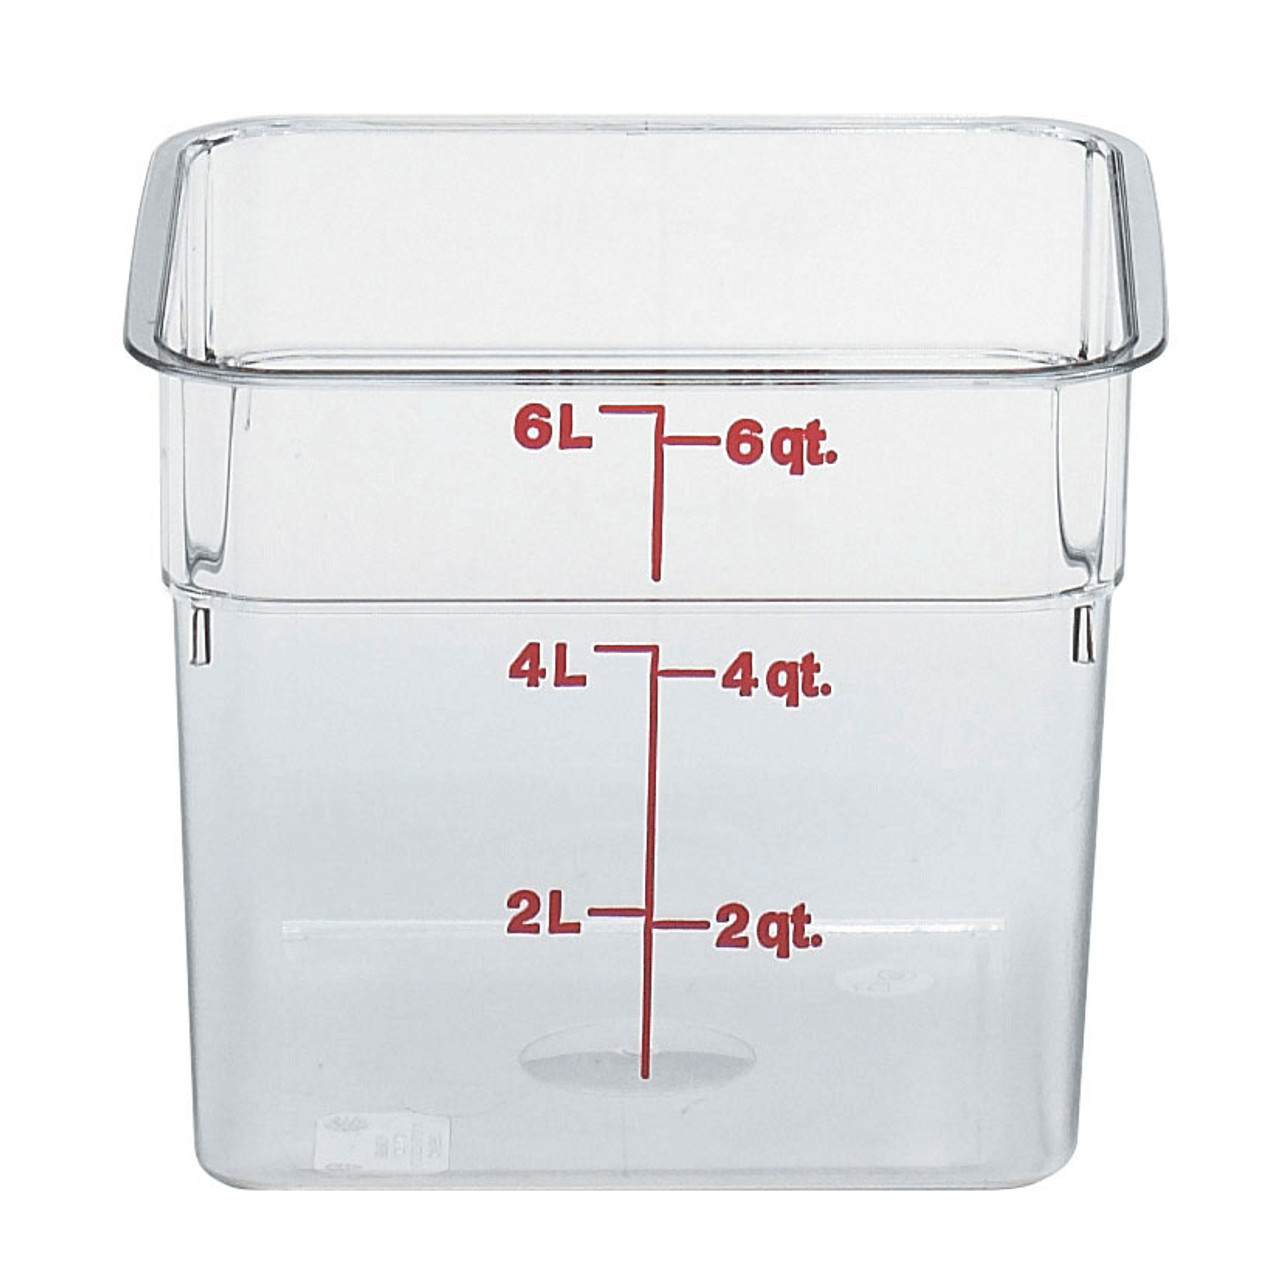 https://cdn11.bigcommerce.com/s-g3i86bef61/images/stencil/1280x1280/products/1848/685/Cambro-6SFSCW135-CamSquare-Food-Container__96273.1661452465.jpg?c=1